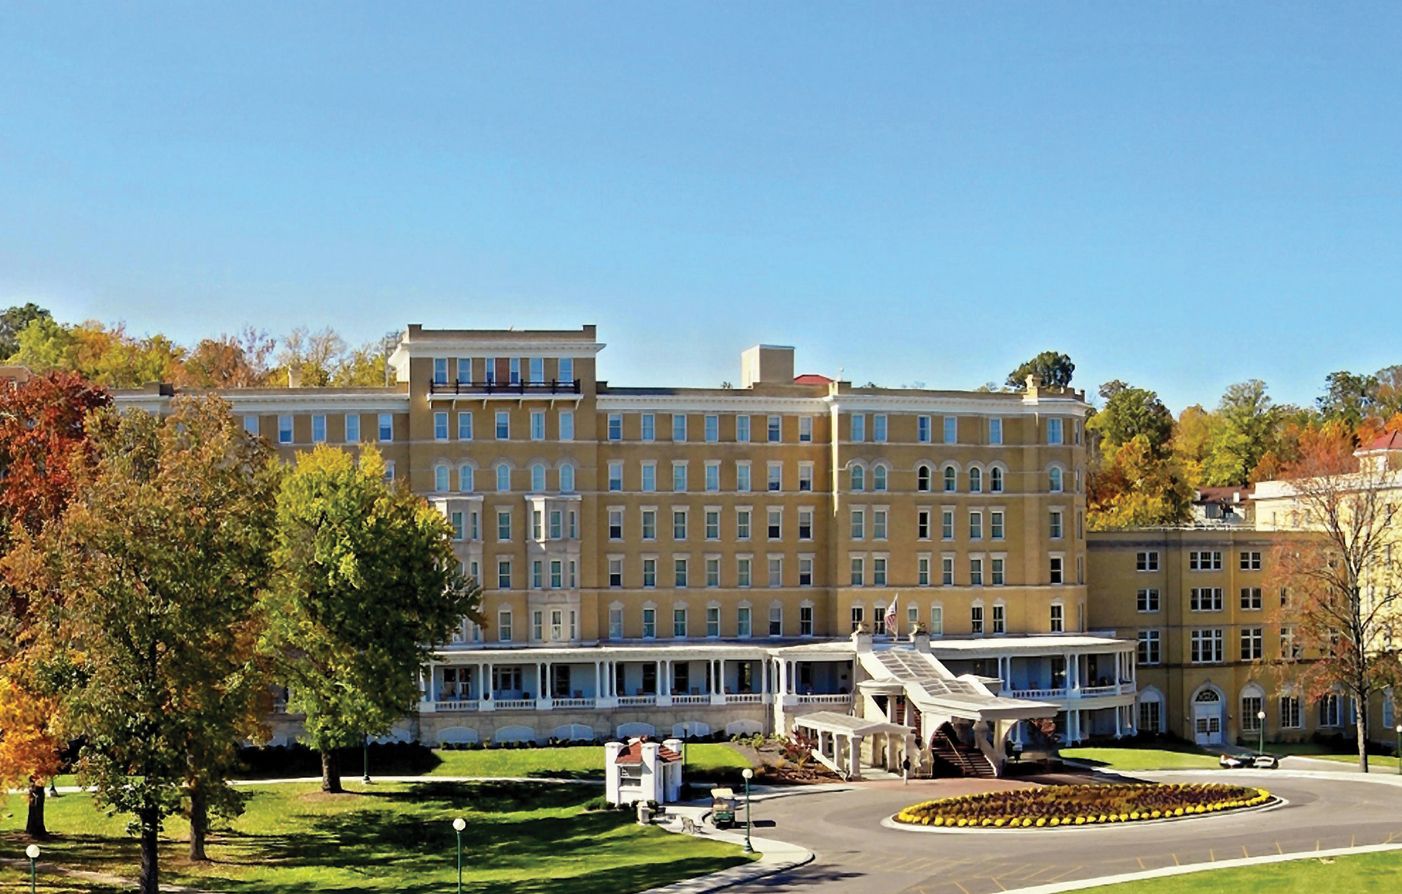 French lick springs location